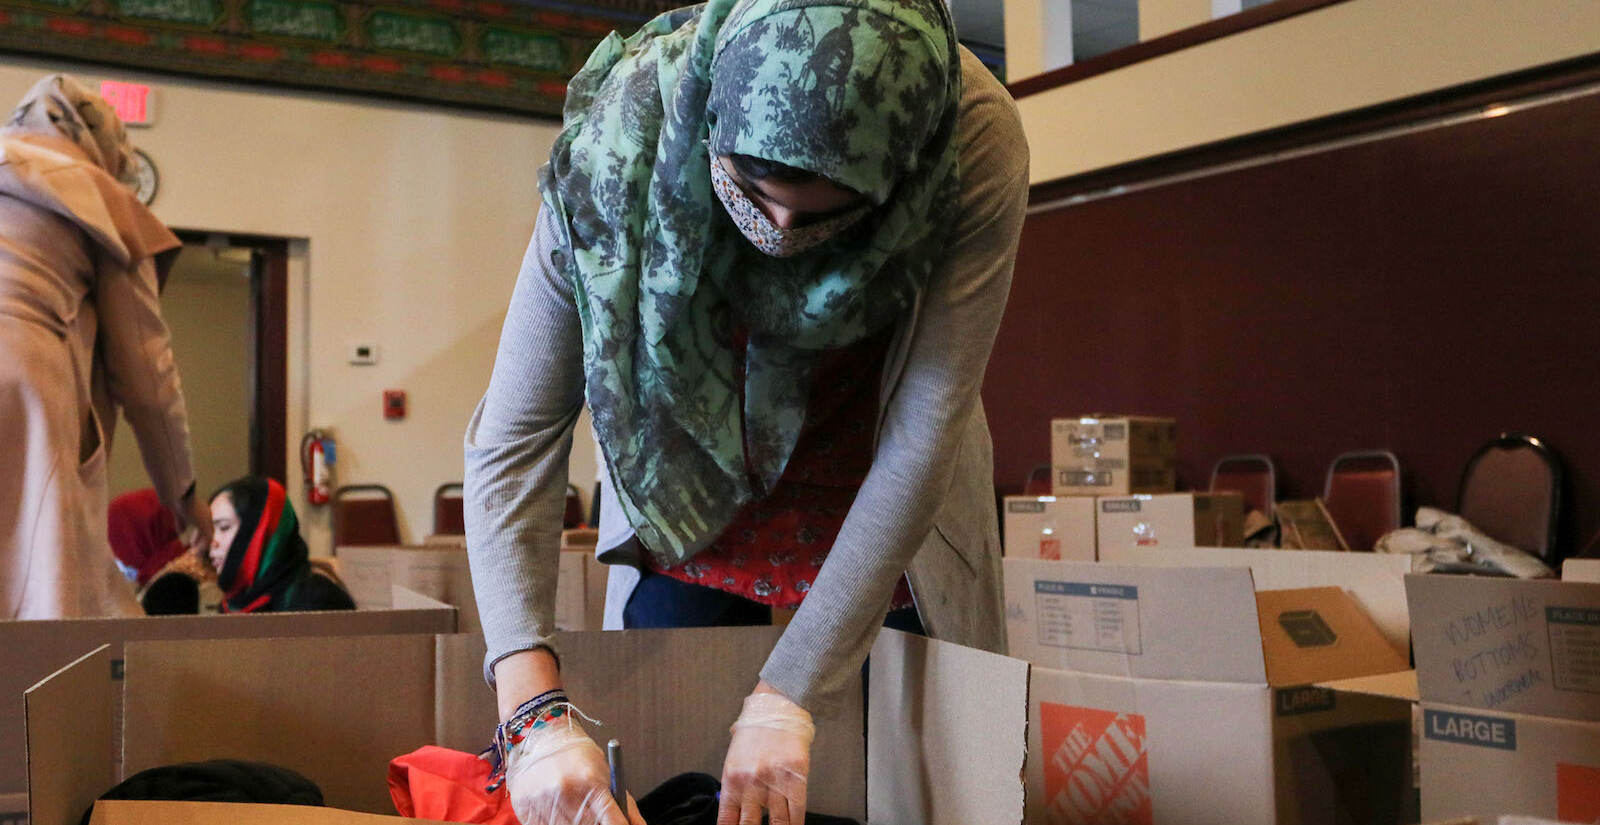 Tahmina Achekzai, communications manager at AOPxSOLA, labeling boxes.
A donation pack up for incoming Afghan refugees run by AOPxSOLA and members of Imam Ali Masjid Mosque at Imam Ali Masjid Mosque in Pennsauken, NJ on 11/14/21.
[DANIELLA HEMINGHAUS]